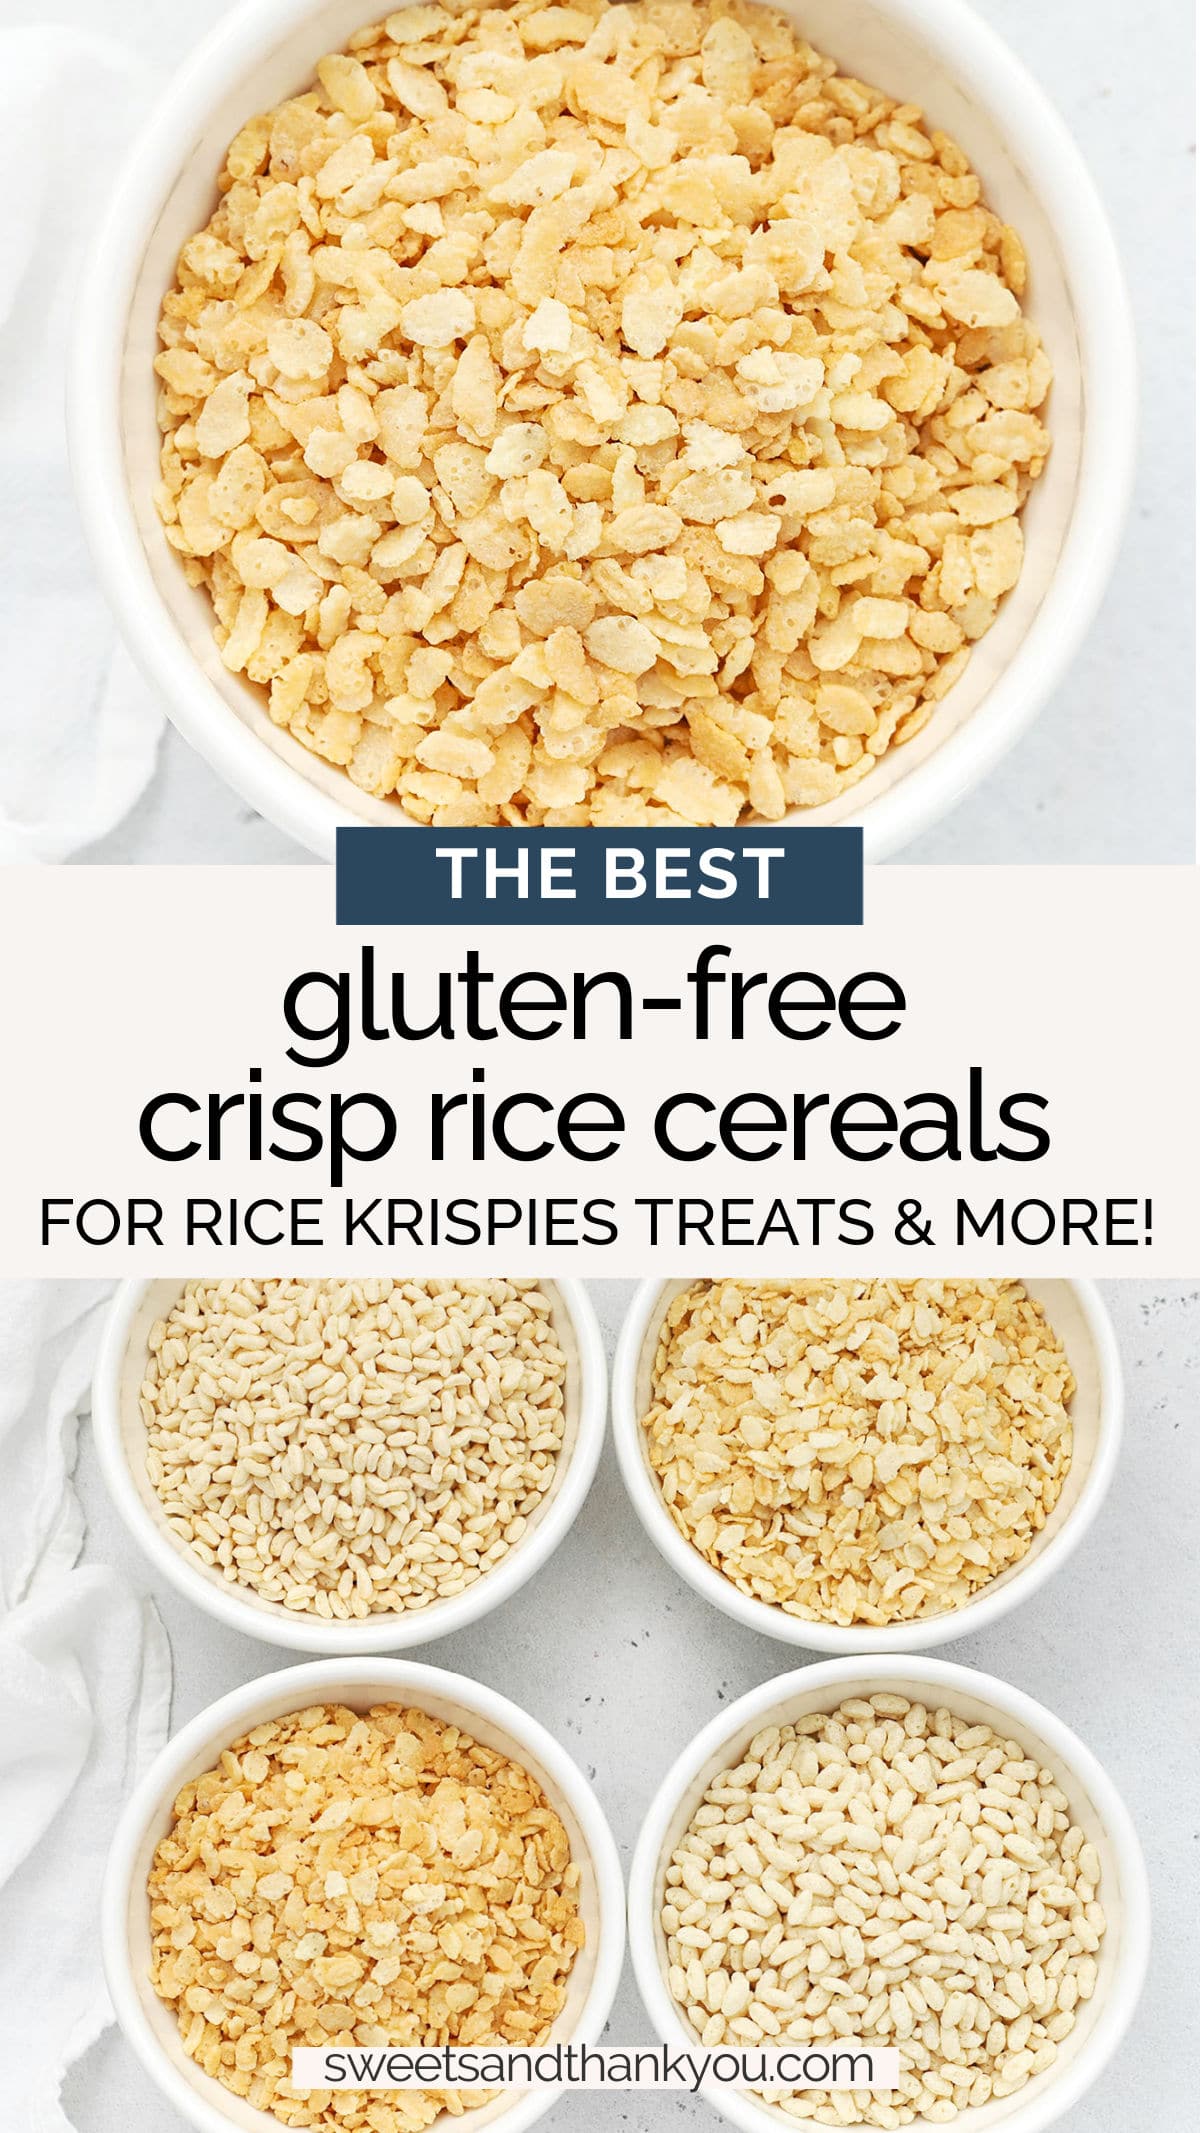 Rice Krispies are NOT gluten-free, but these are the best brands of gluten-free crisp rice cereal for gluten-free Rice Krispies treats & more! // what brands of rice krispies are gluten-free? gluten-free crisp rice cereal // gluten-free rice krispies treats cereal // gluten-free baking tips // gluten-free taste test // the best gluten-free rice krispies treats // gluten-free rice Krispies brands //